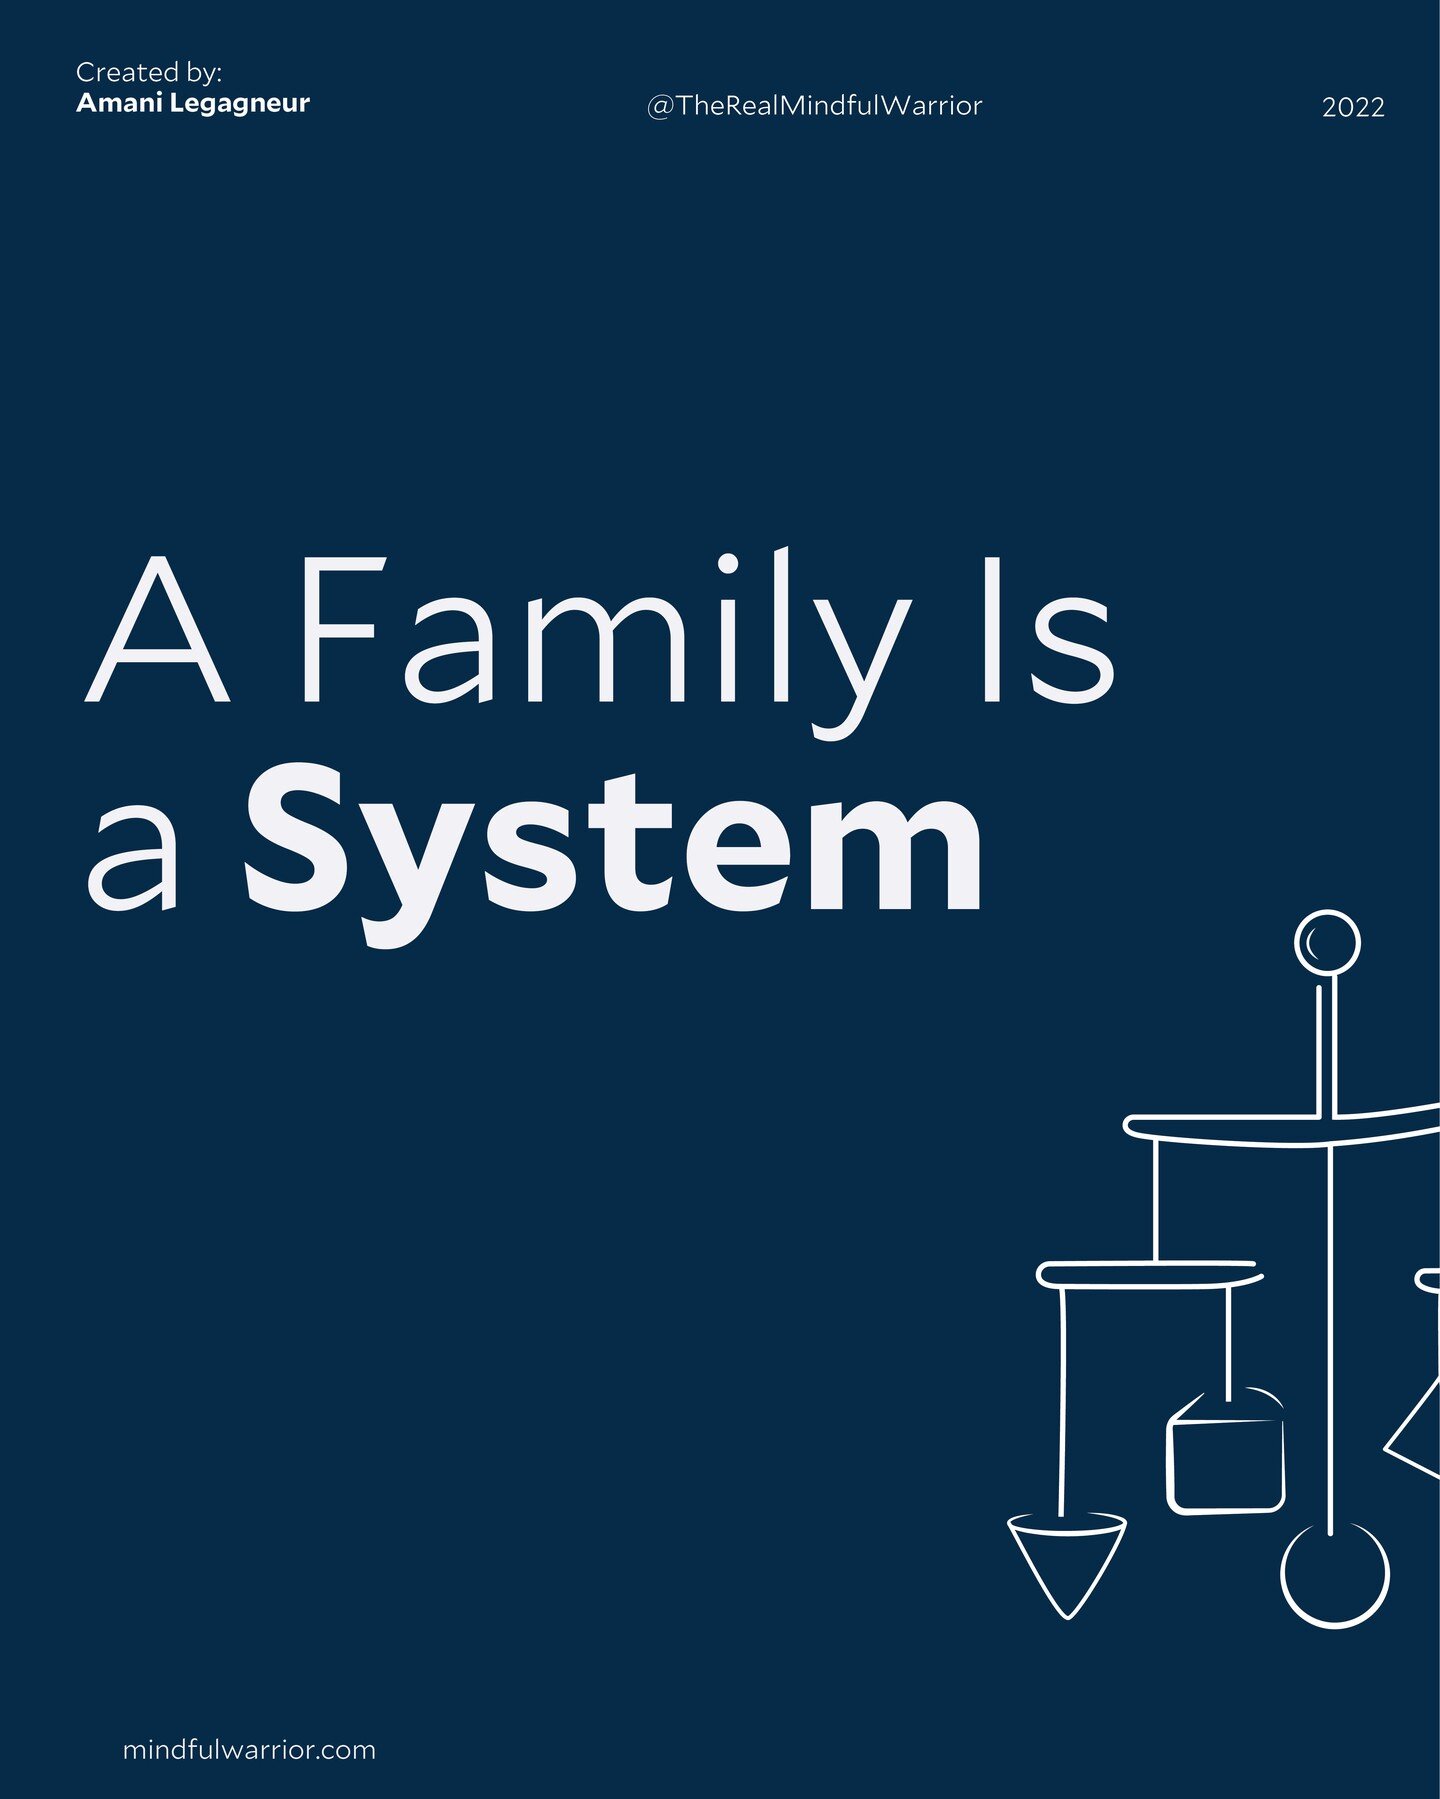 As a system, families are networks of interconnected parts. They are living, breathing systems, meaning family relationships ebb and flow with change. Every member of a family plays a critical role. How are you growing and moving in your family syste